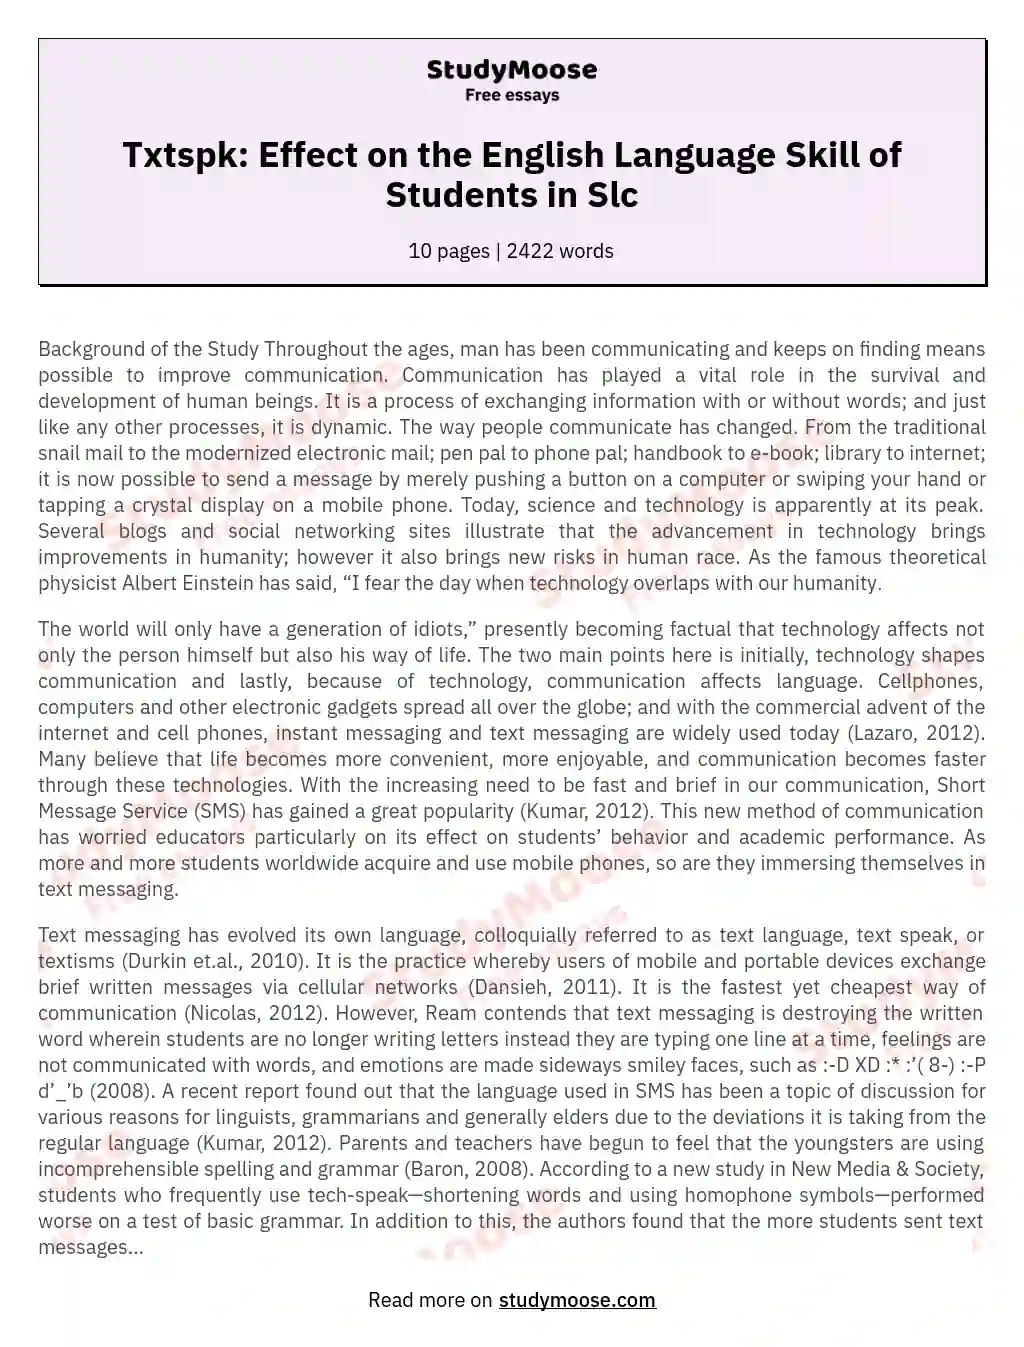 Txtspk: Effect on the English Language Skill of Students in Slc